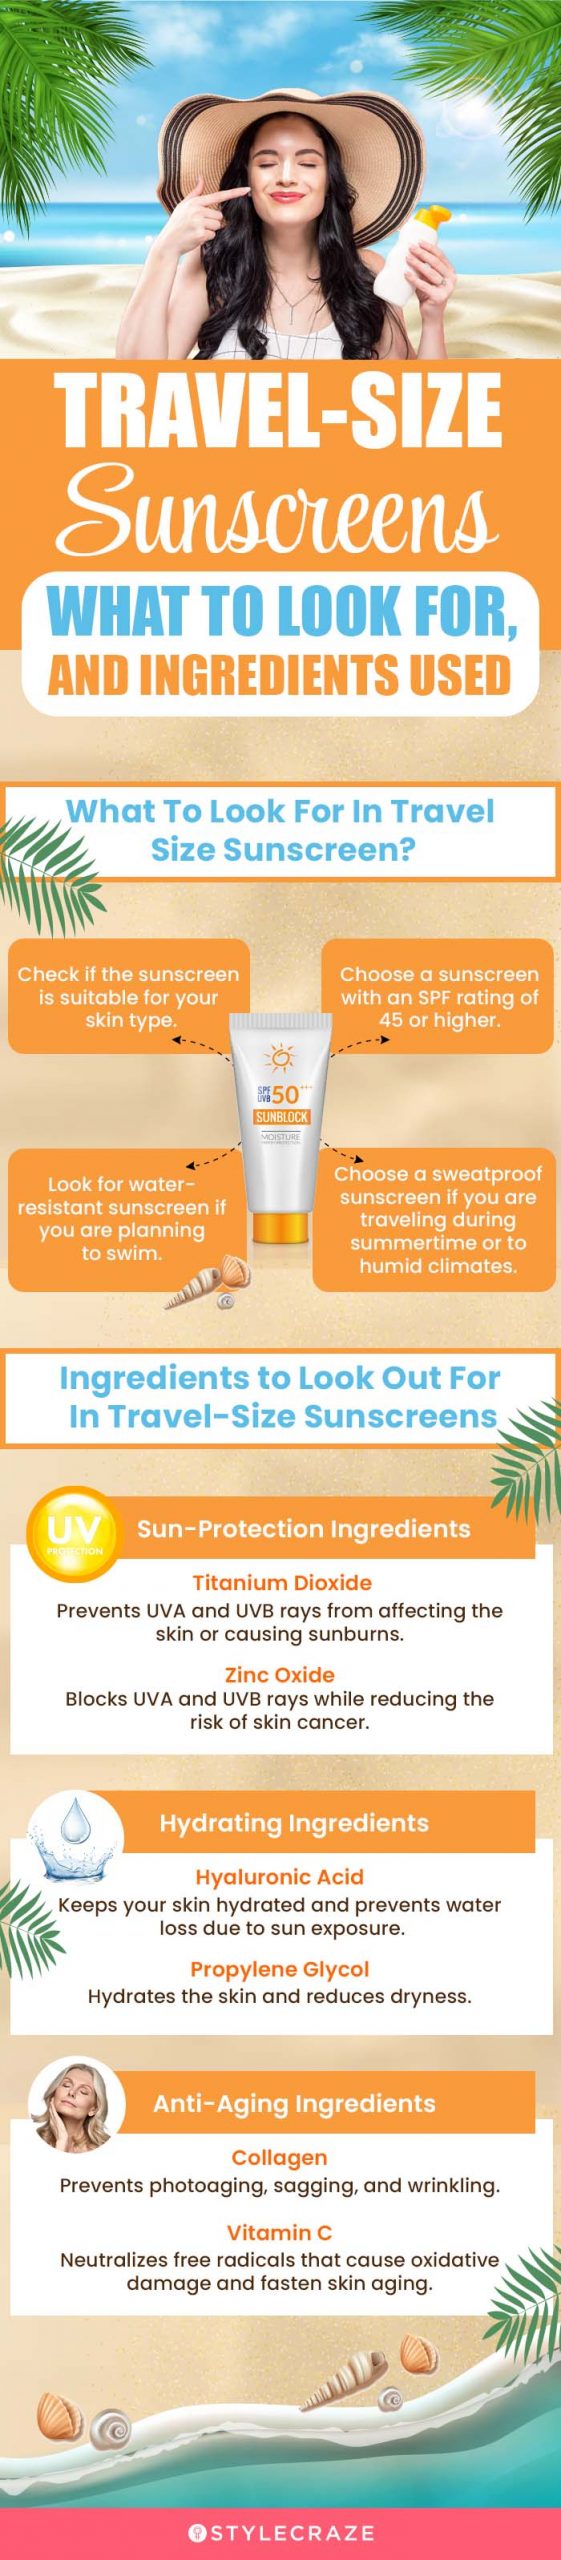 Travel-Size Sunscreens: What To Look For (infographic)